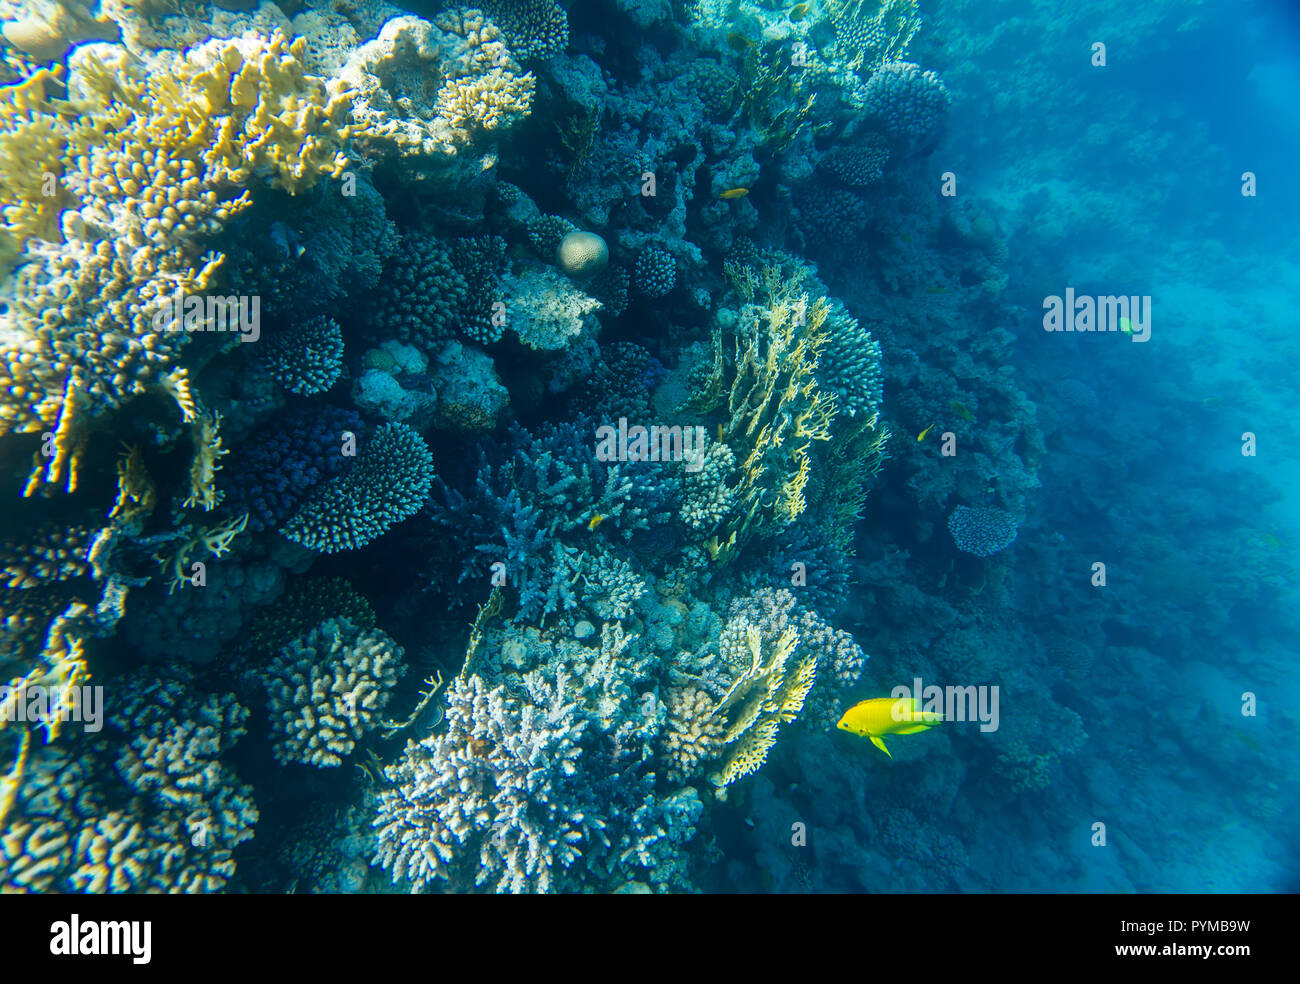 coral reef under water Stock Photo